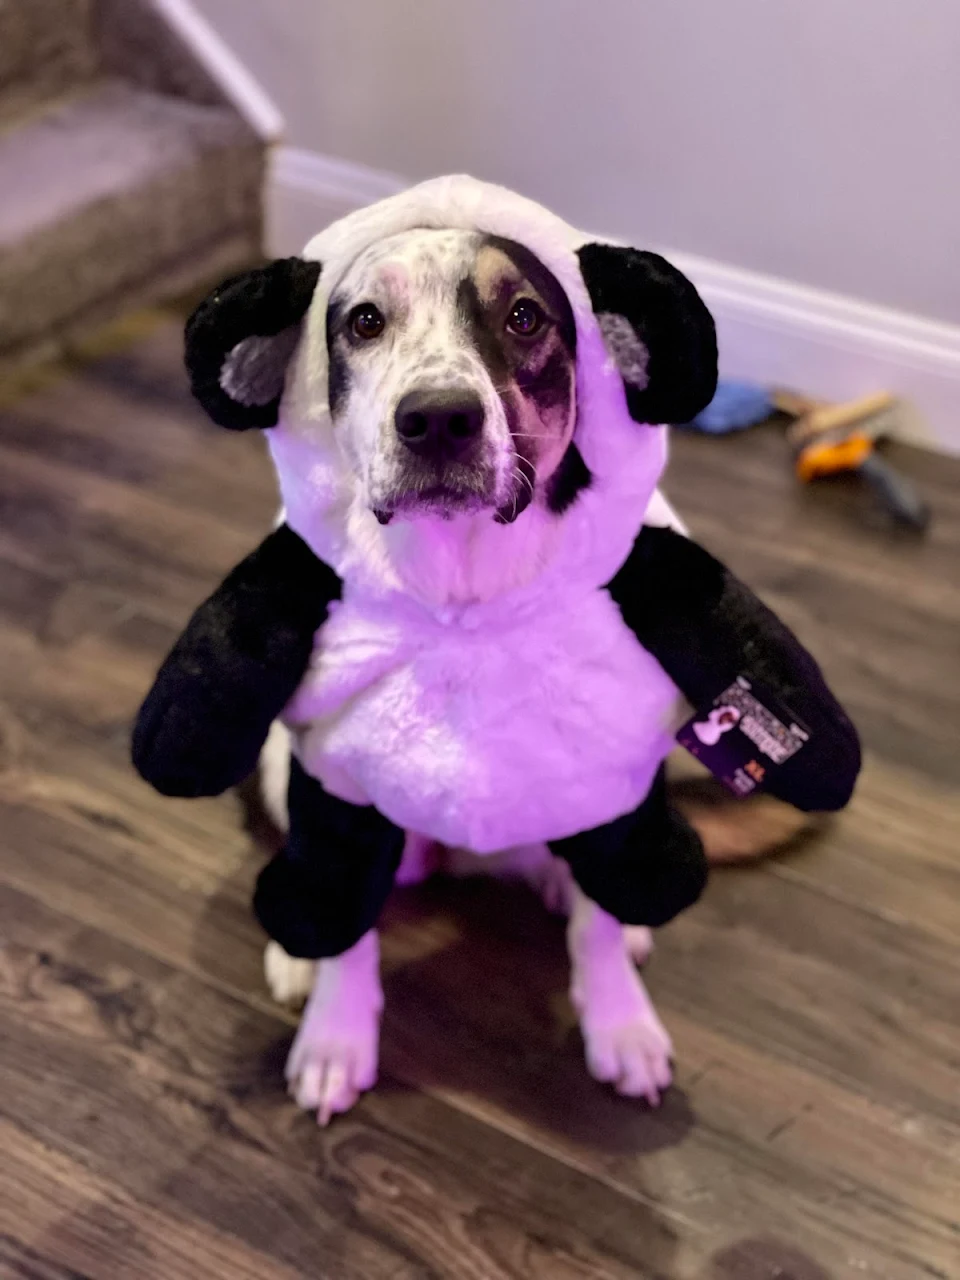 This pup is a sad panda. She gets so excited to put costumes on then sits & tries to look pitiful after to collect her cookie.